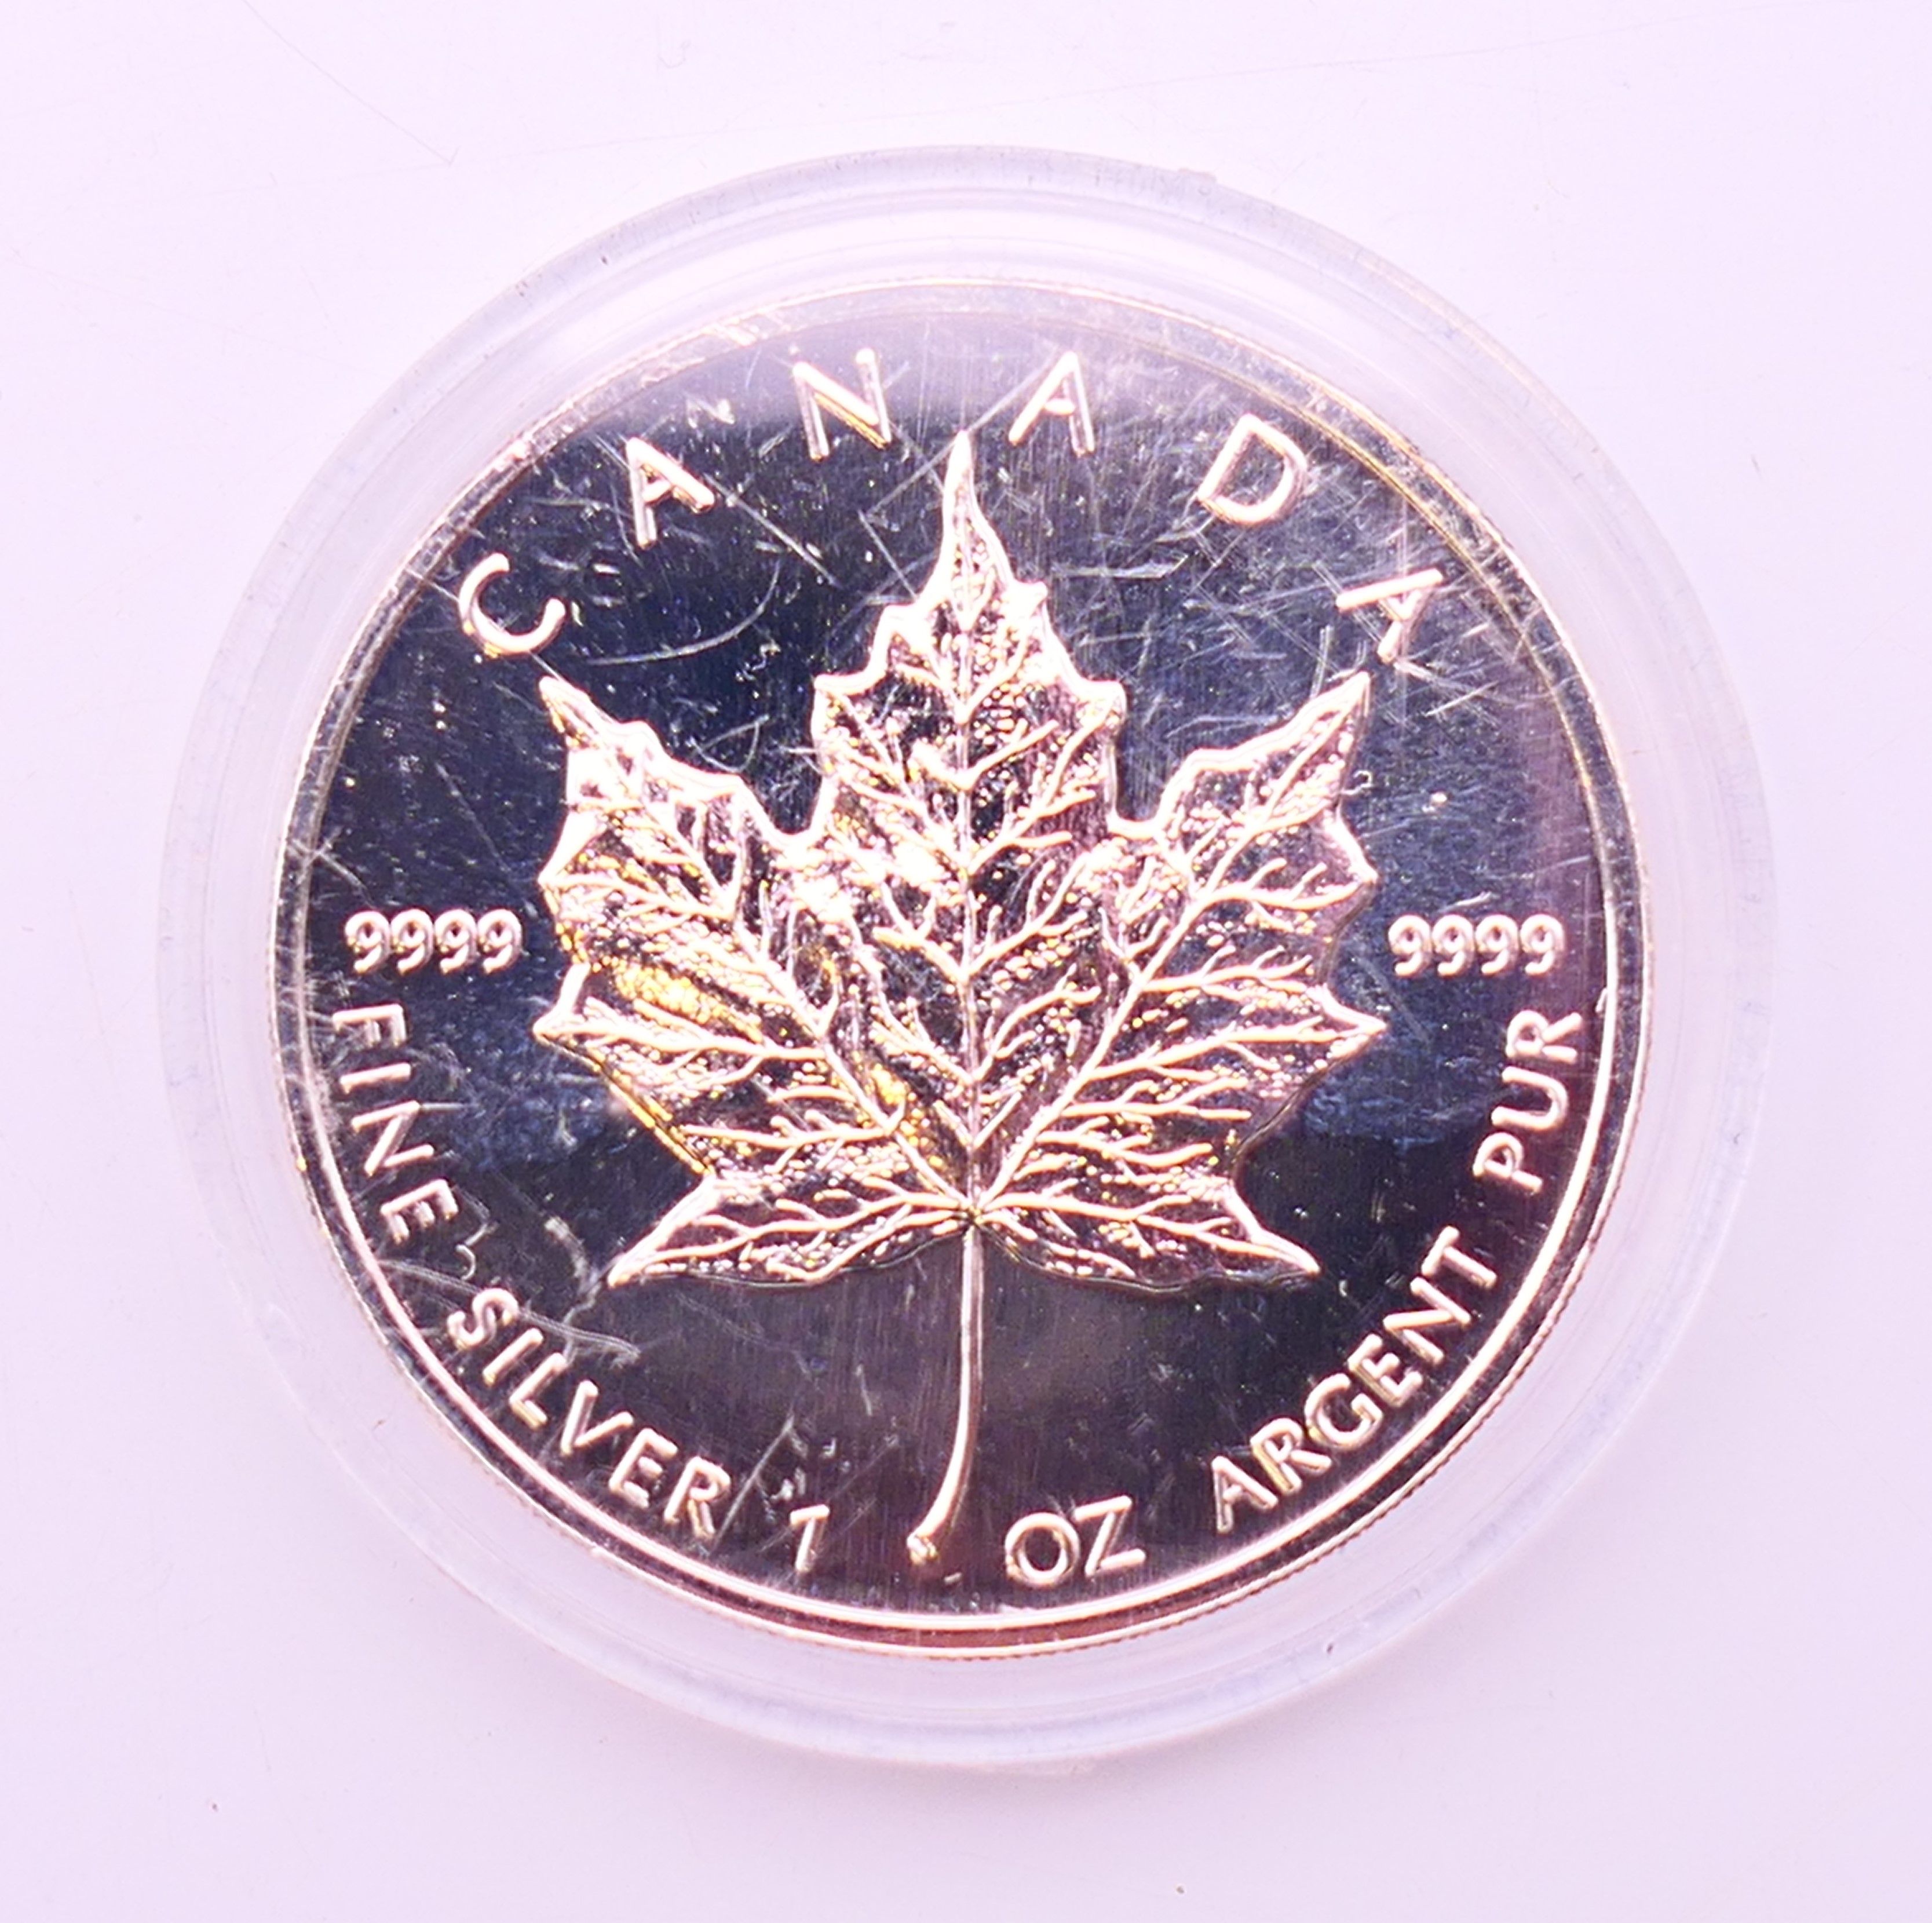 A 1994 Canada silver maple leaf 5 dollar coin, with certificate of authenticity. - Image 2 of 6